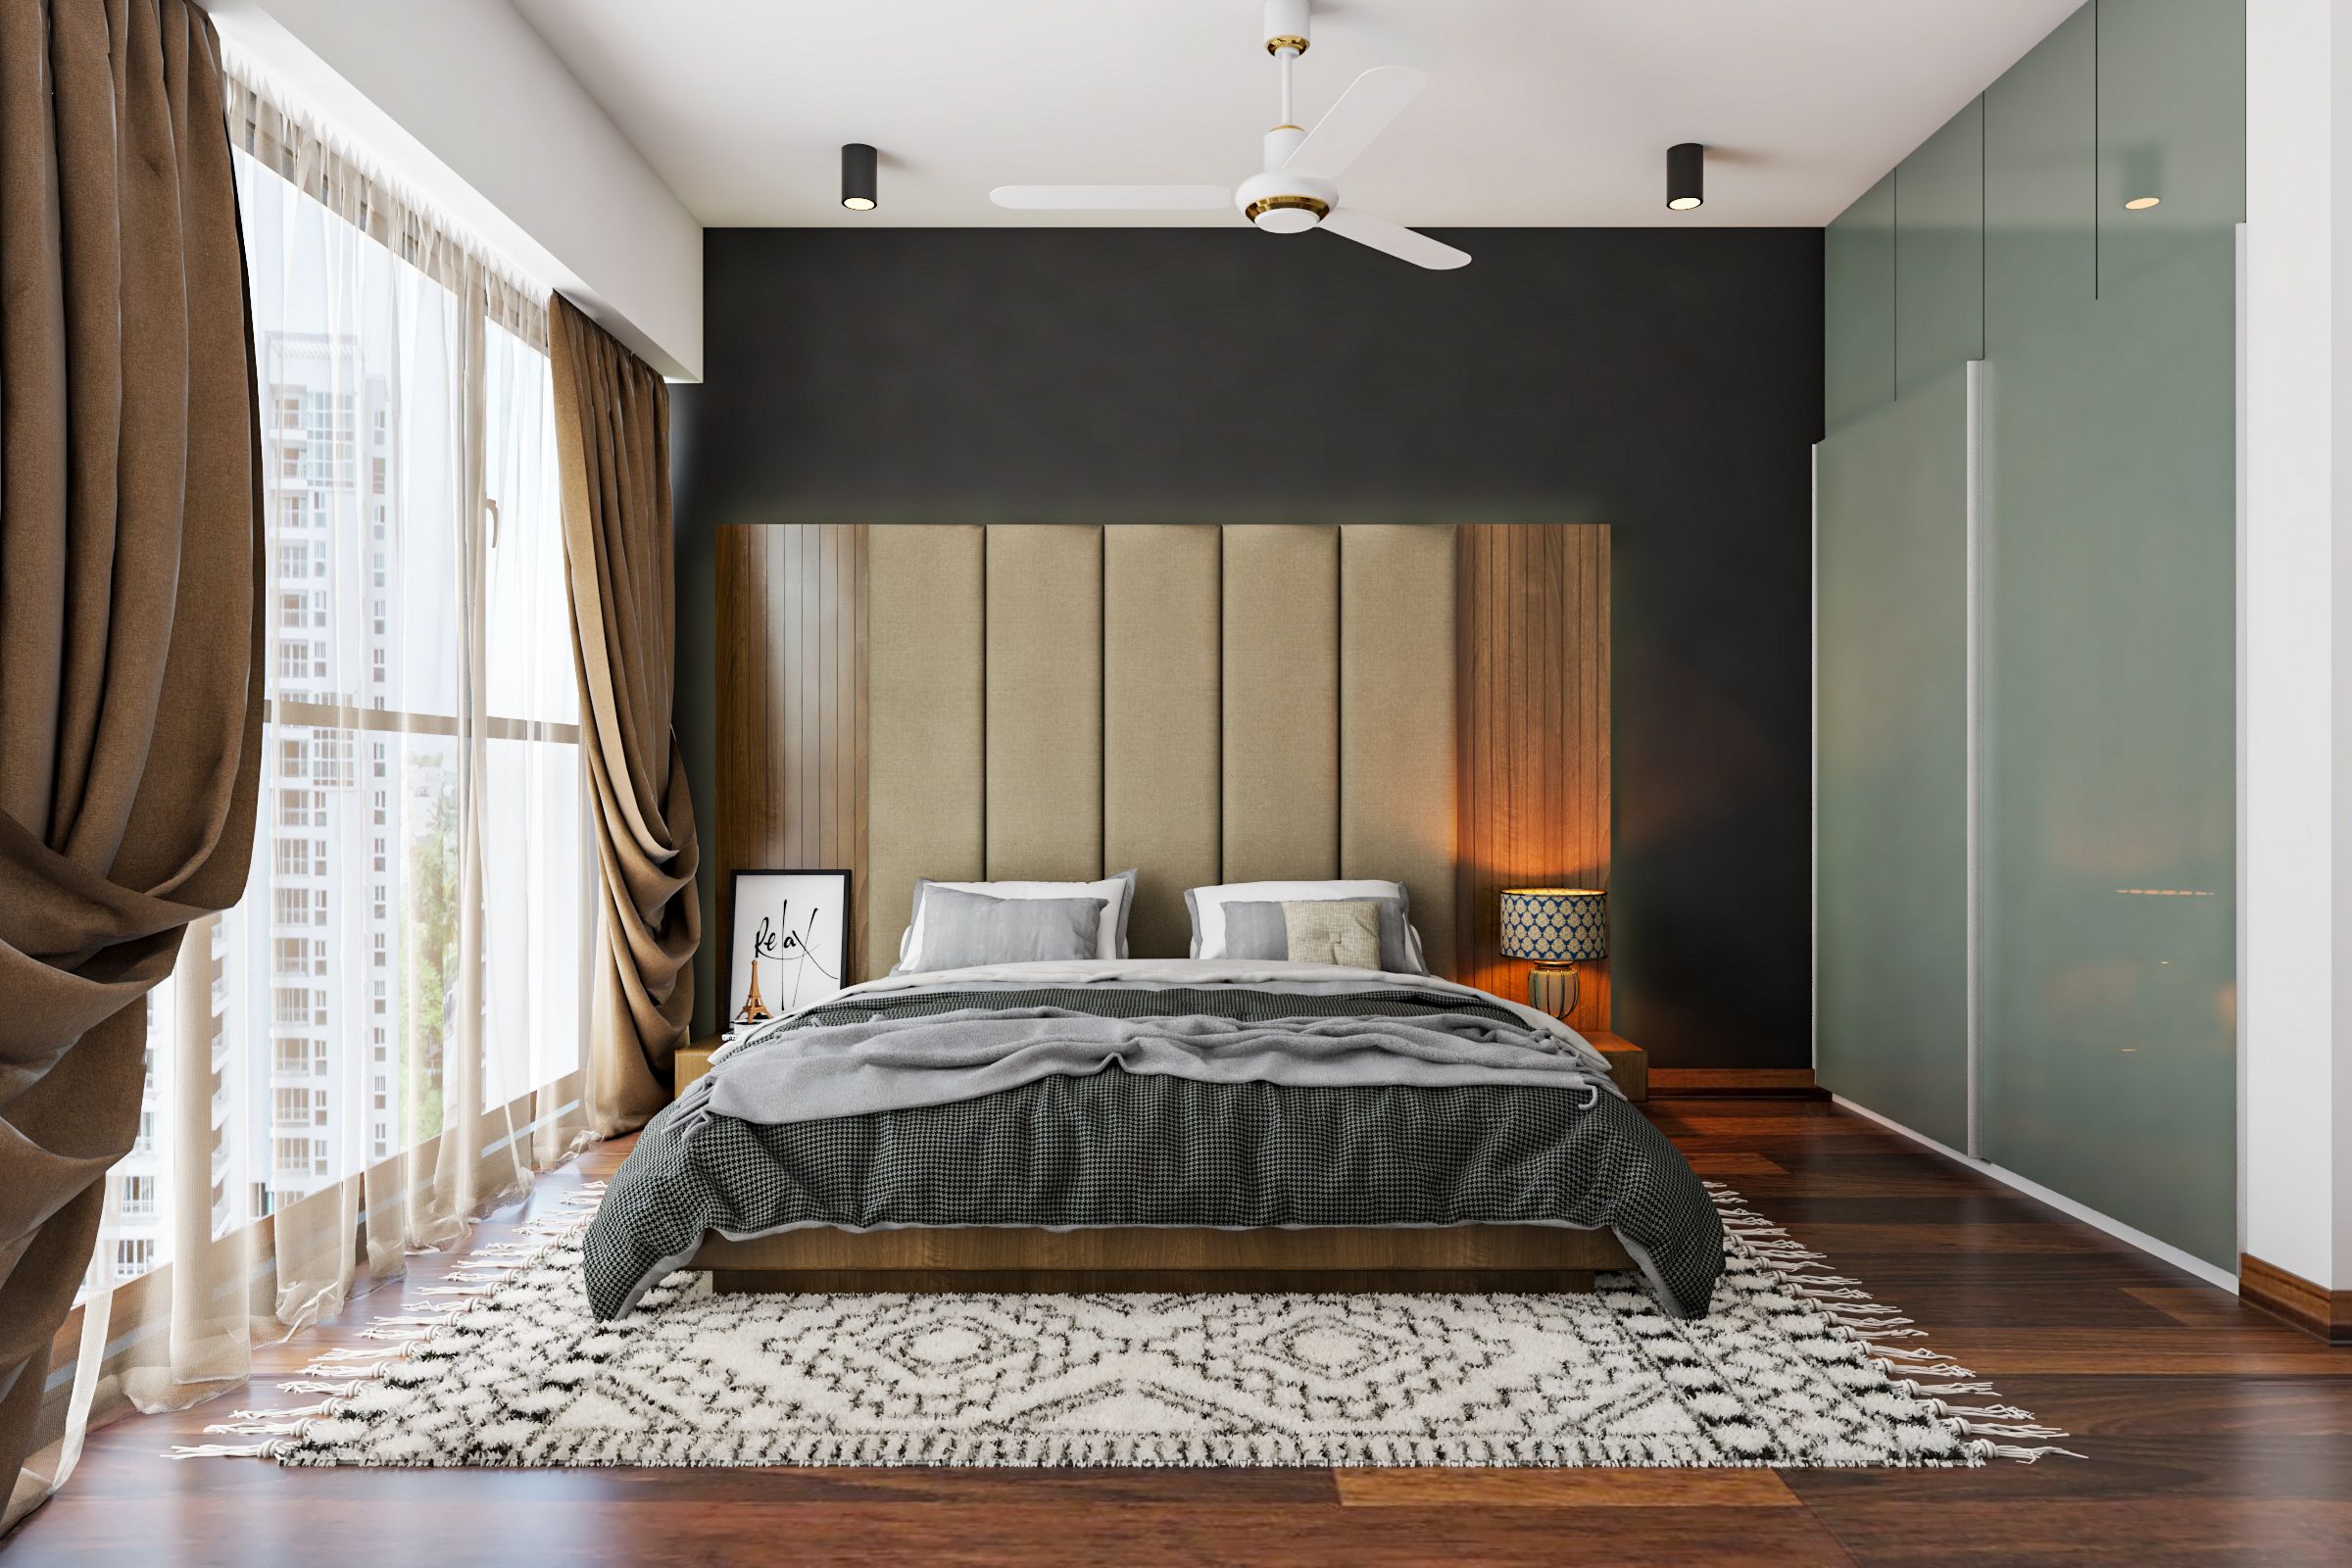 Sophisticated Bedroom with Wooden Flooring